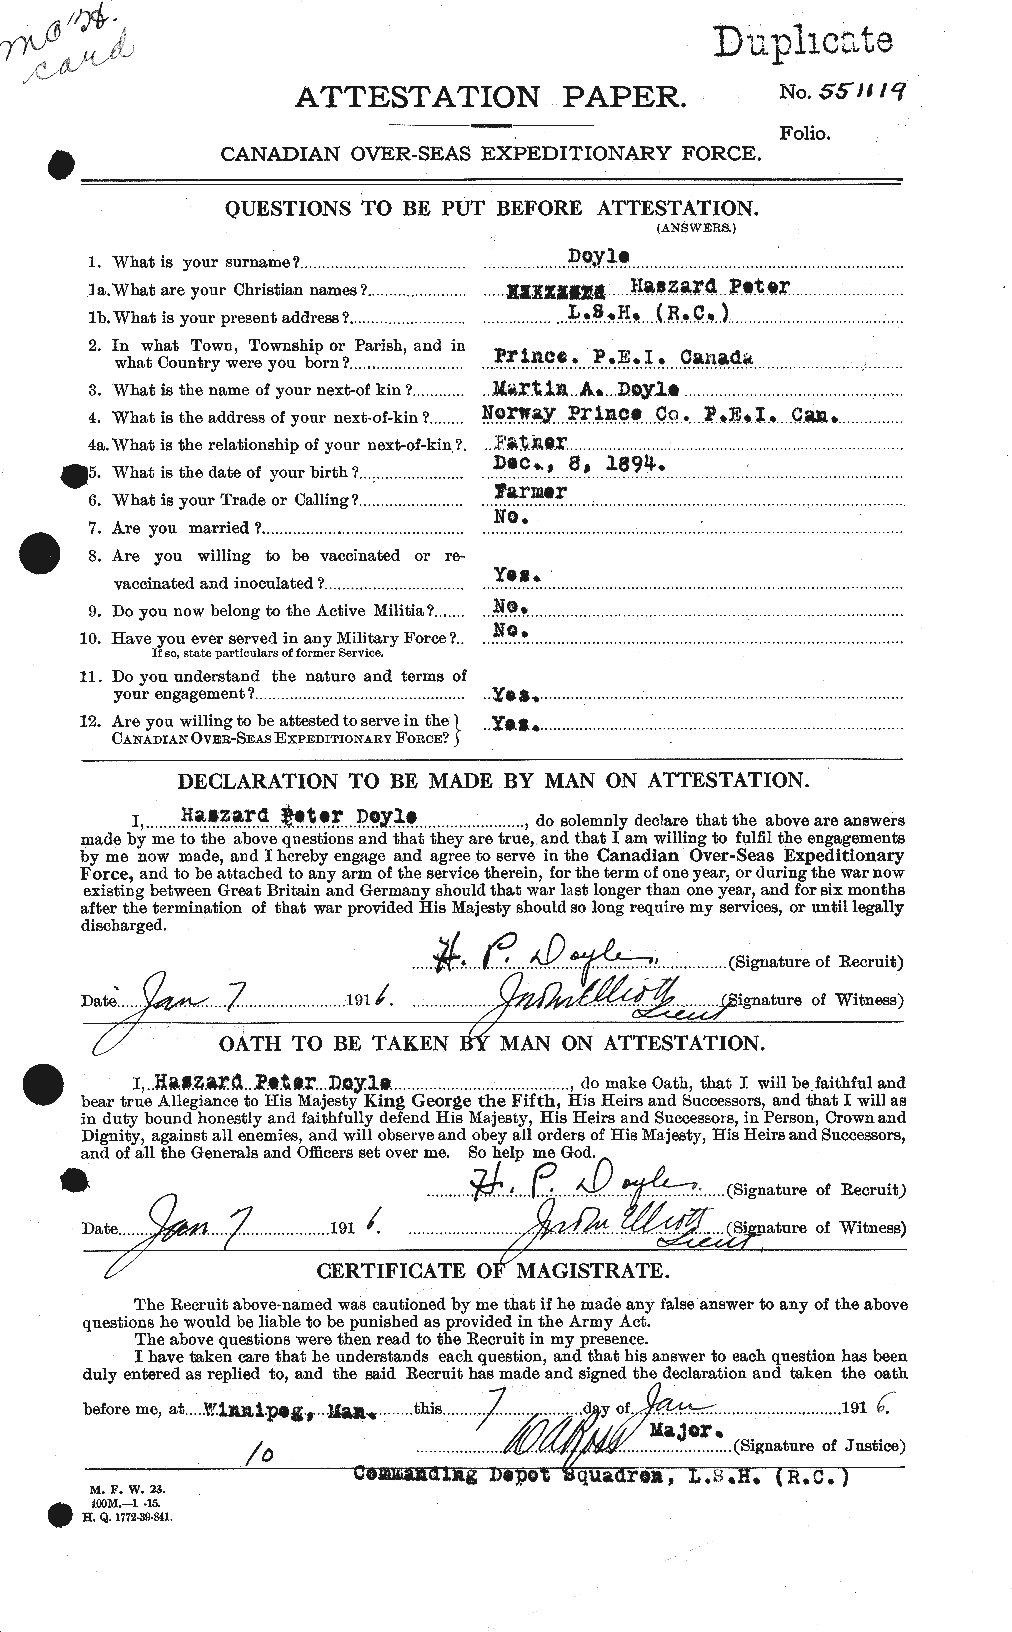 Personnel Records of the First World War - CEF 298508a